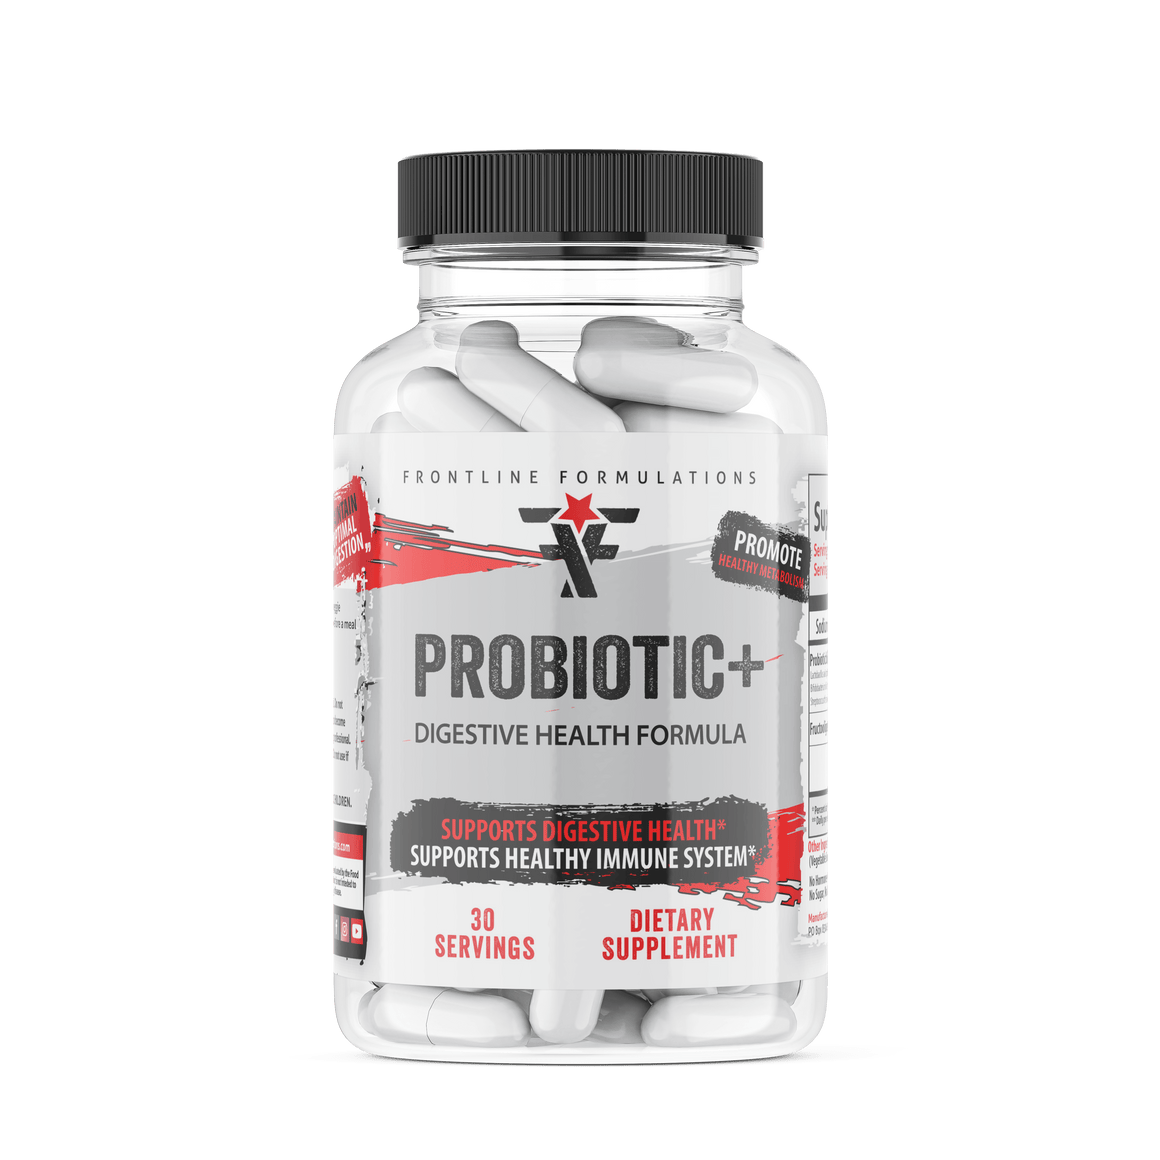 Frontline Formulations Probiotics+ Probiotic+ Probiotic supplement, 10 Stains with 20 billion active cultures: supports digestive and immune health with 20 billion cultures from 10 probiotic strains, our formula contains live microorganisms that helps kee